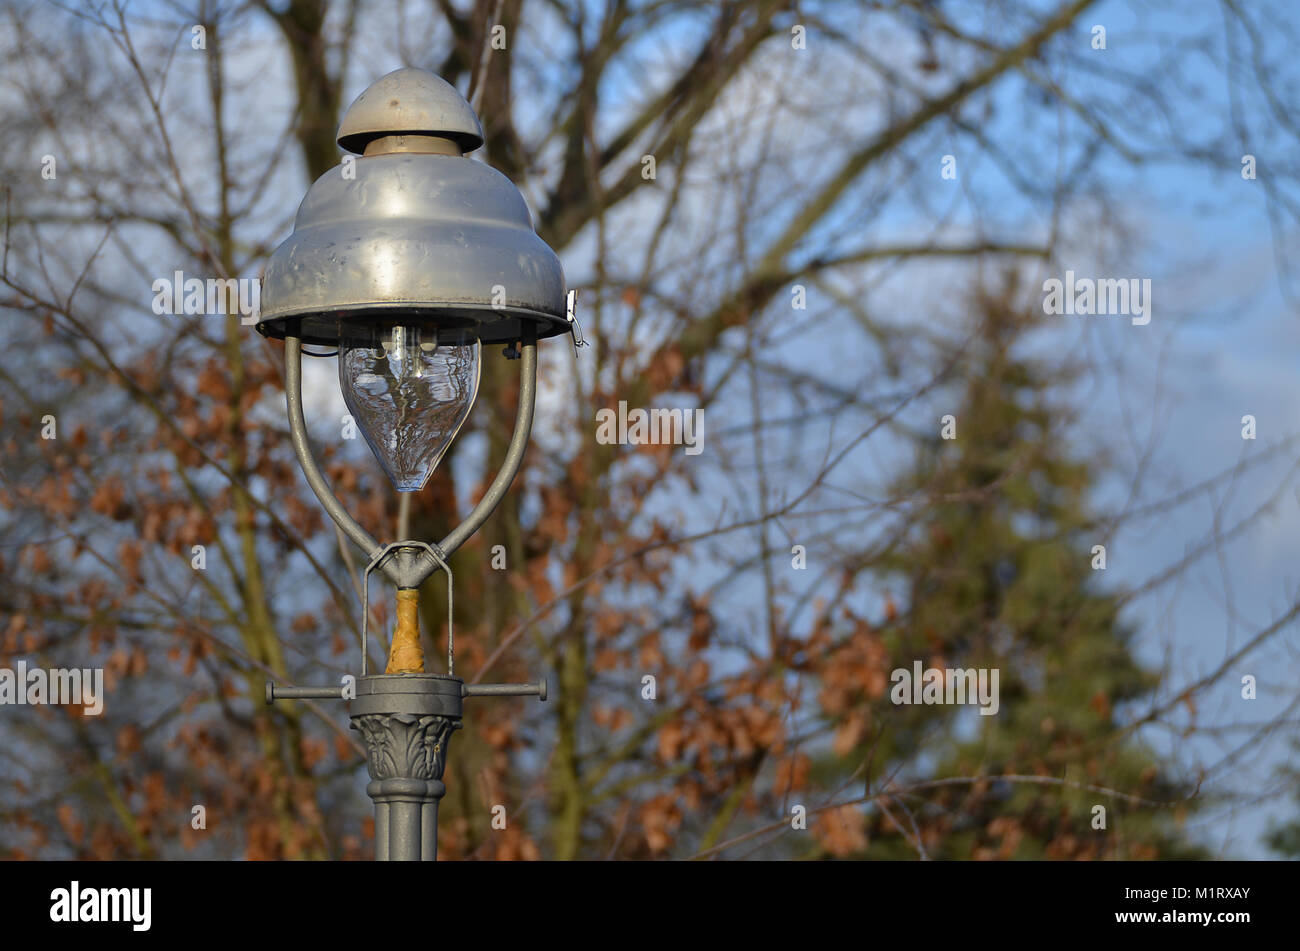 a gas lantern on Berlin streets at daytime in closeup Stock Photo